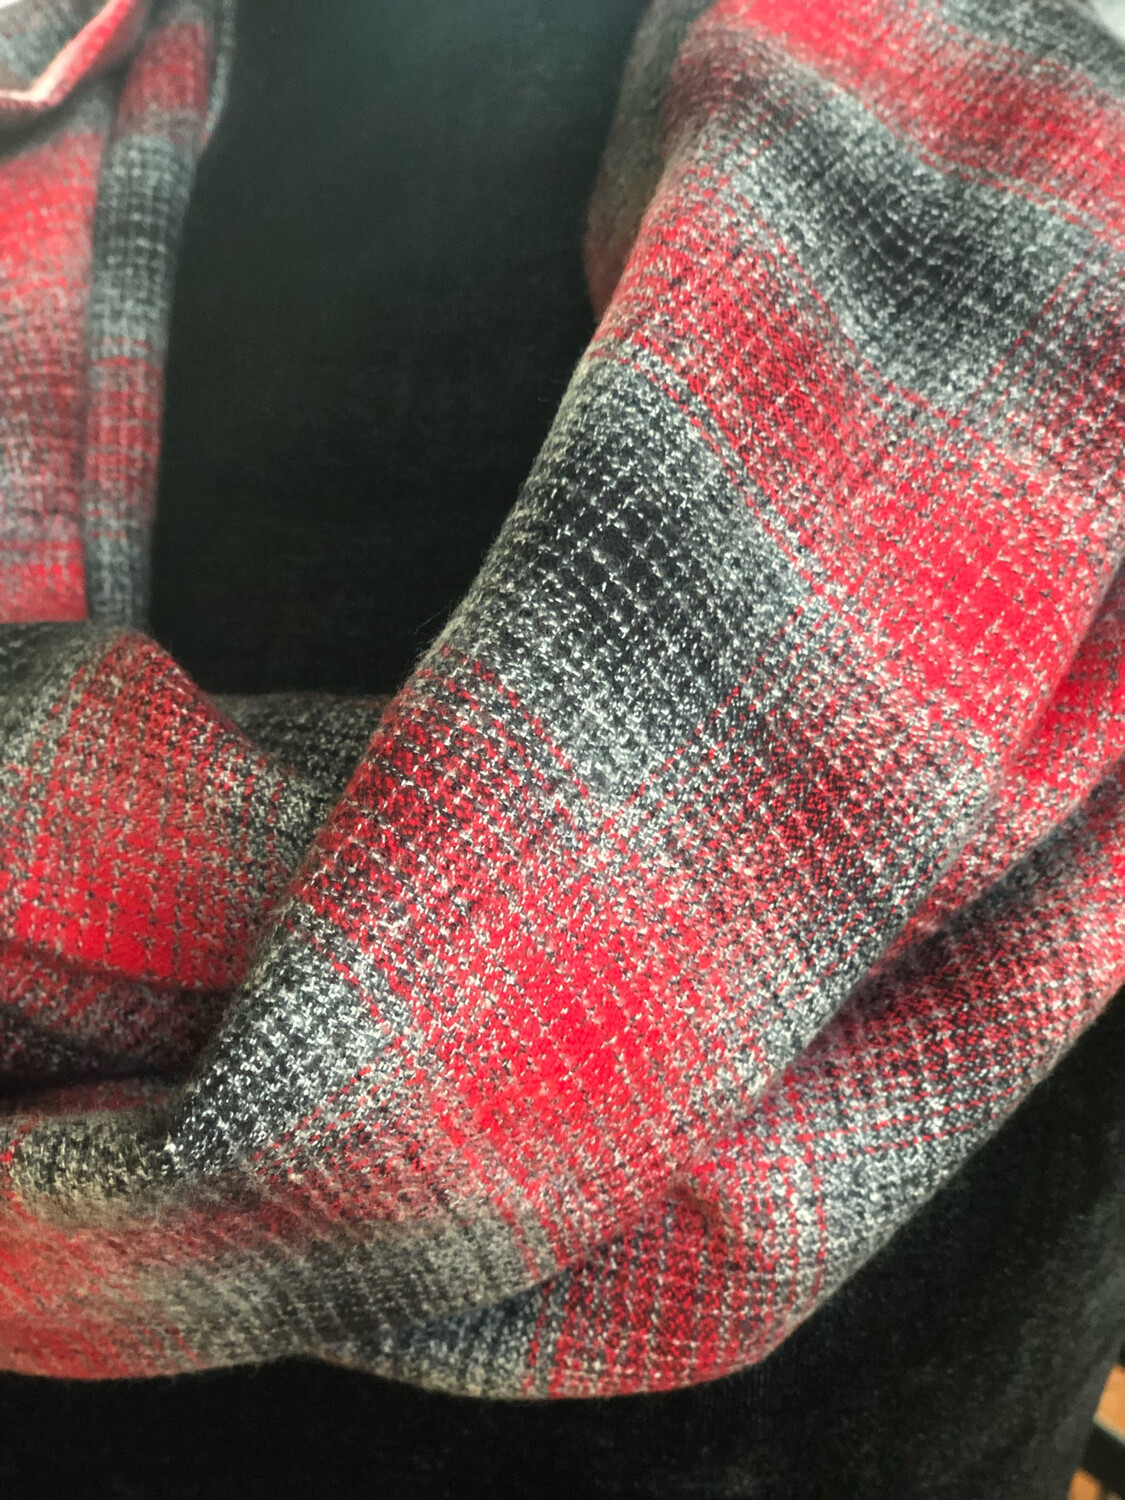 Grey & Red Plaid Infinity Scarf with Hidden Pocket! (Flannel)